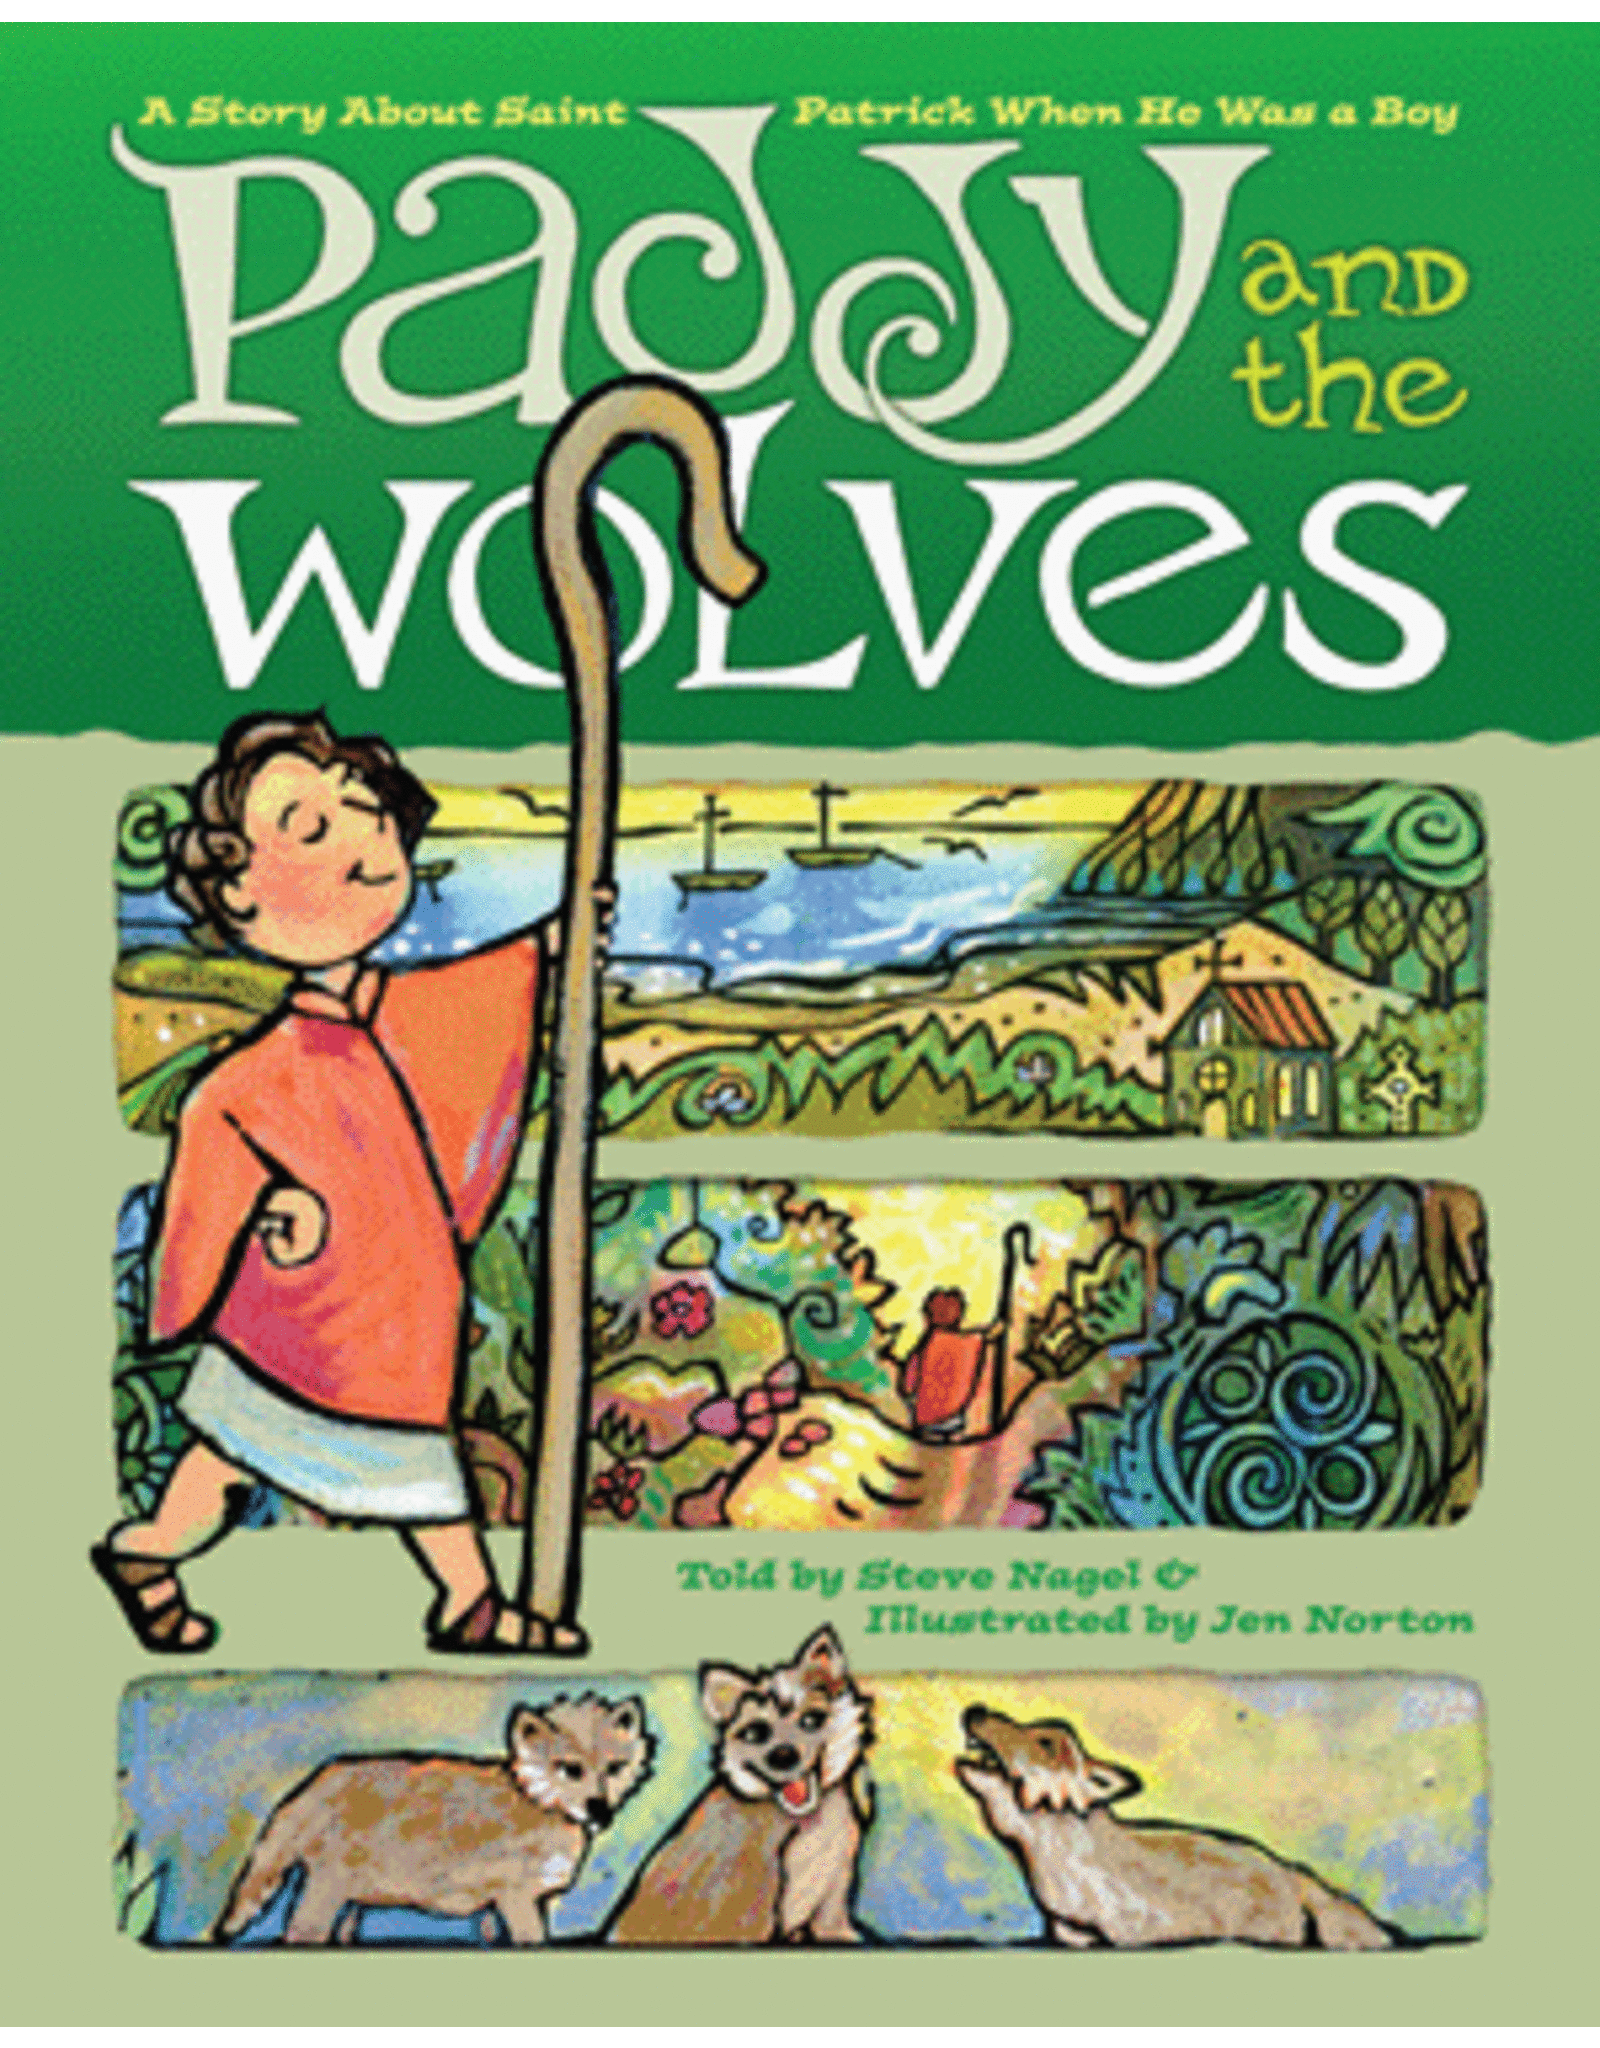 Paddy & the Wolves: A Story about St. Patrick as a Boy